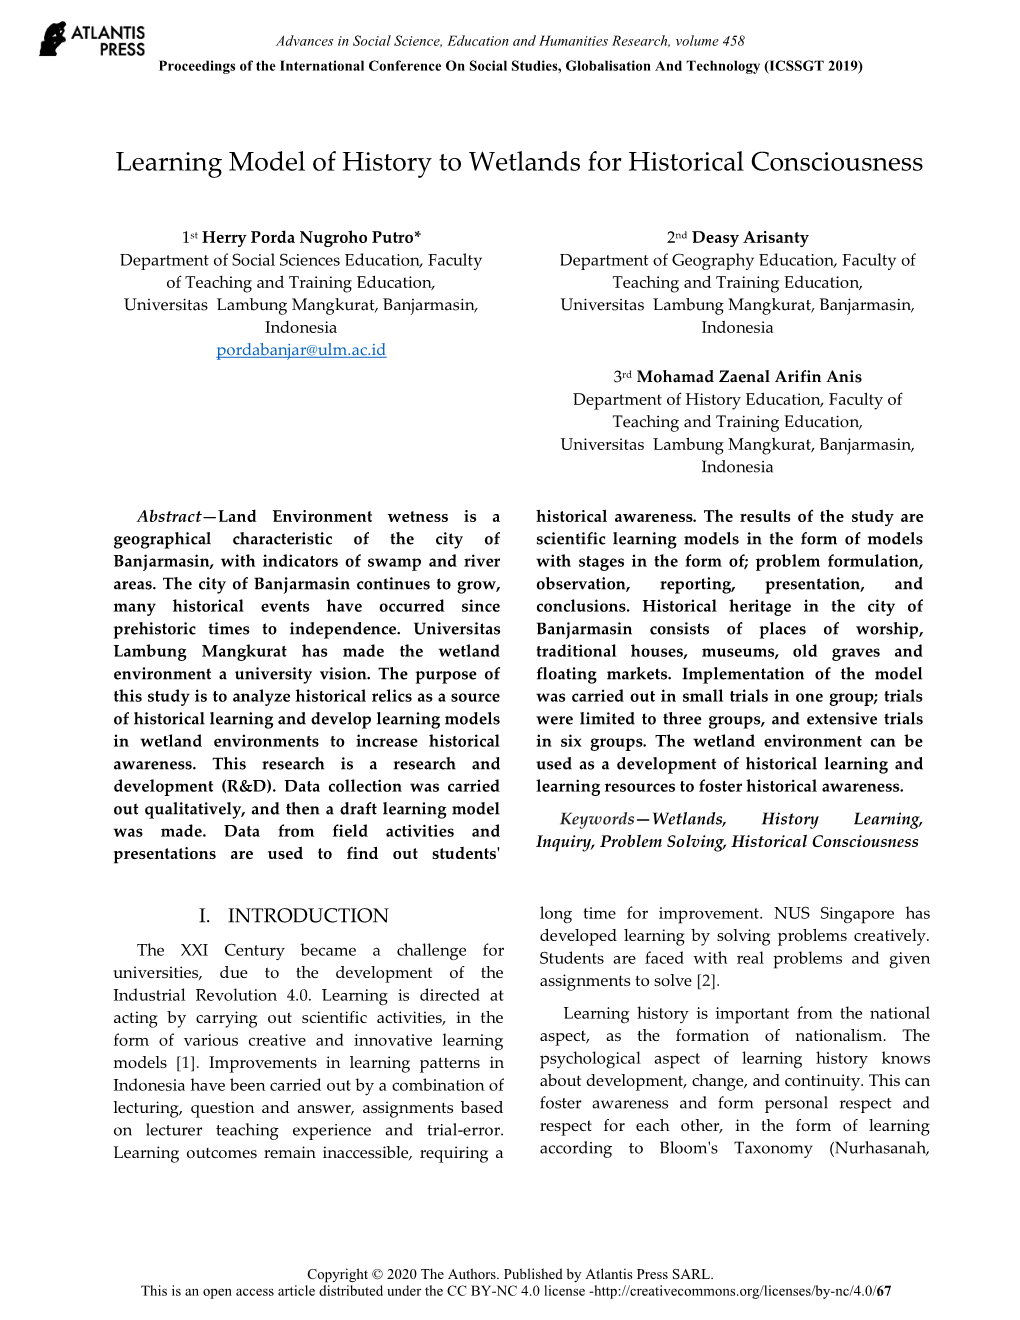 Learning Model of History to Wetlands for Historical Consciousness